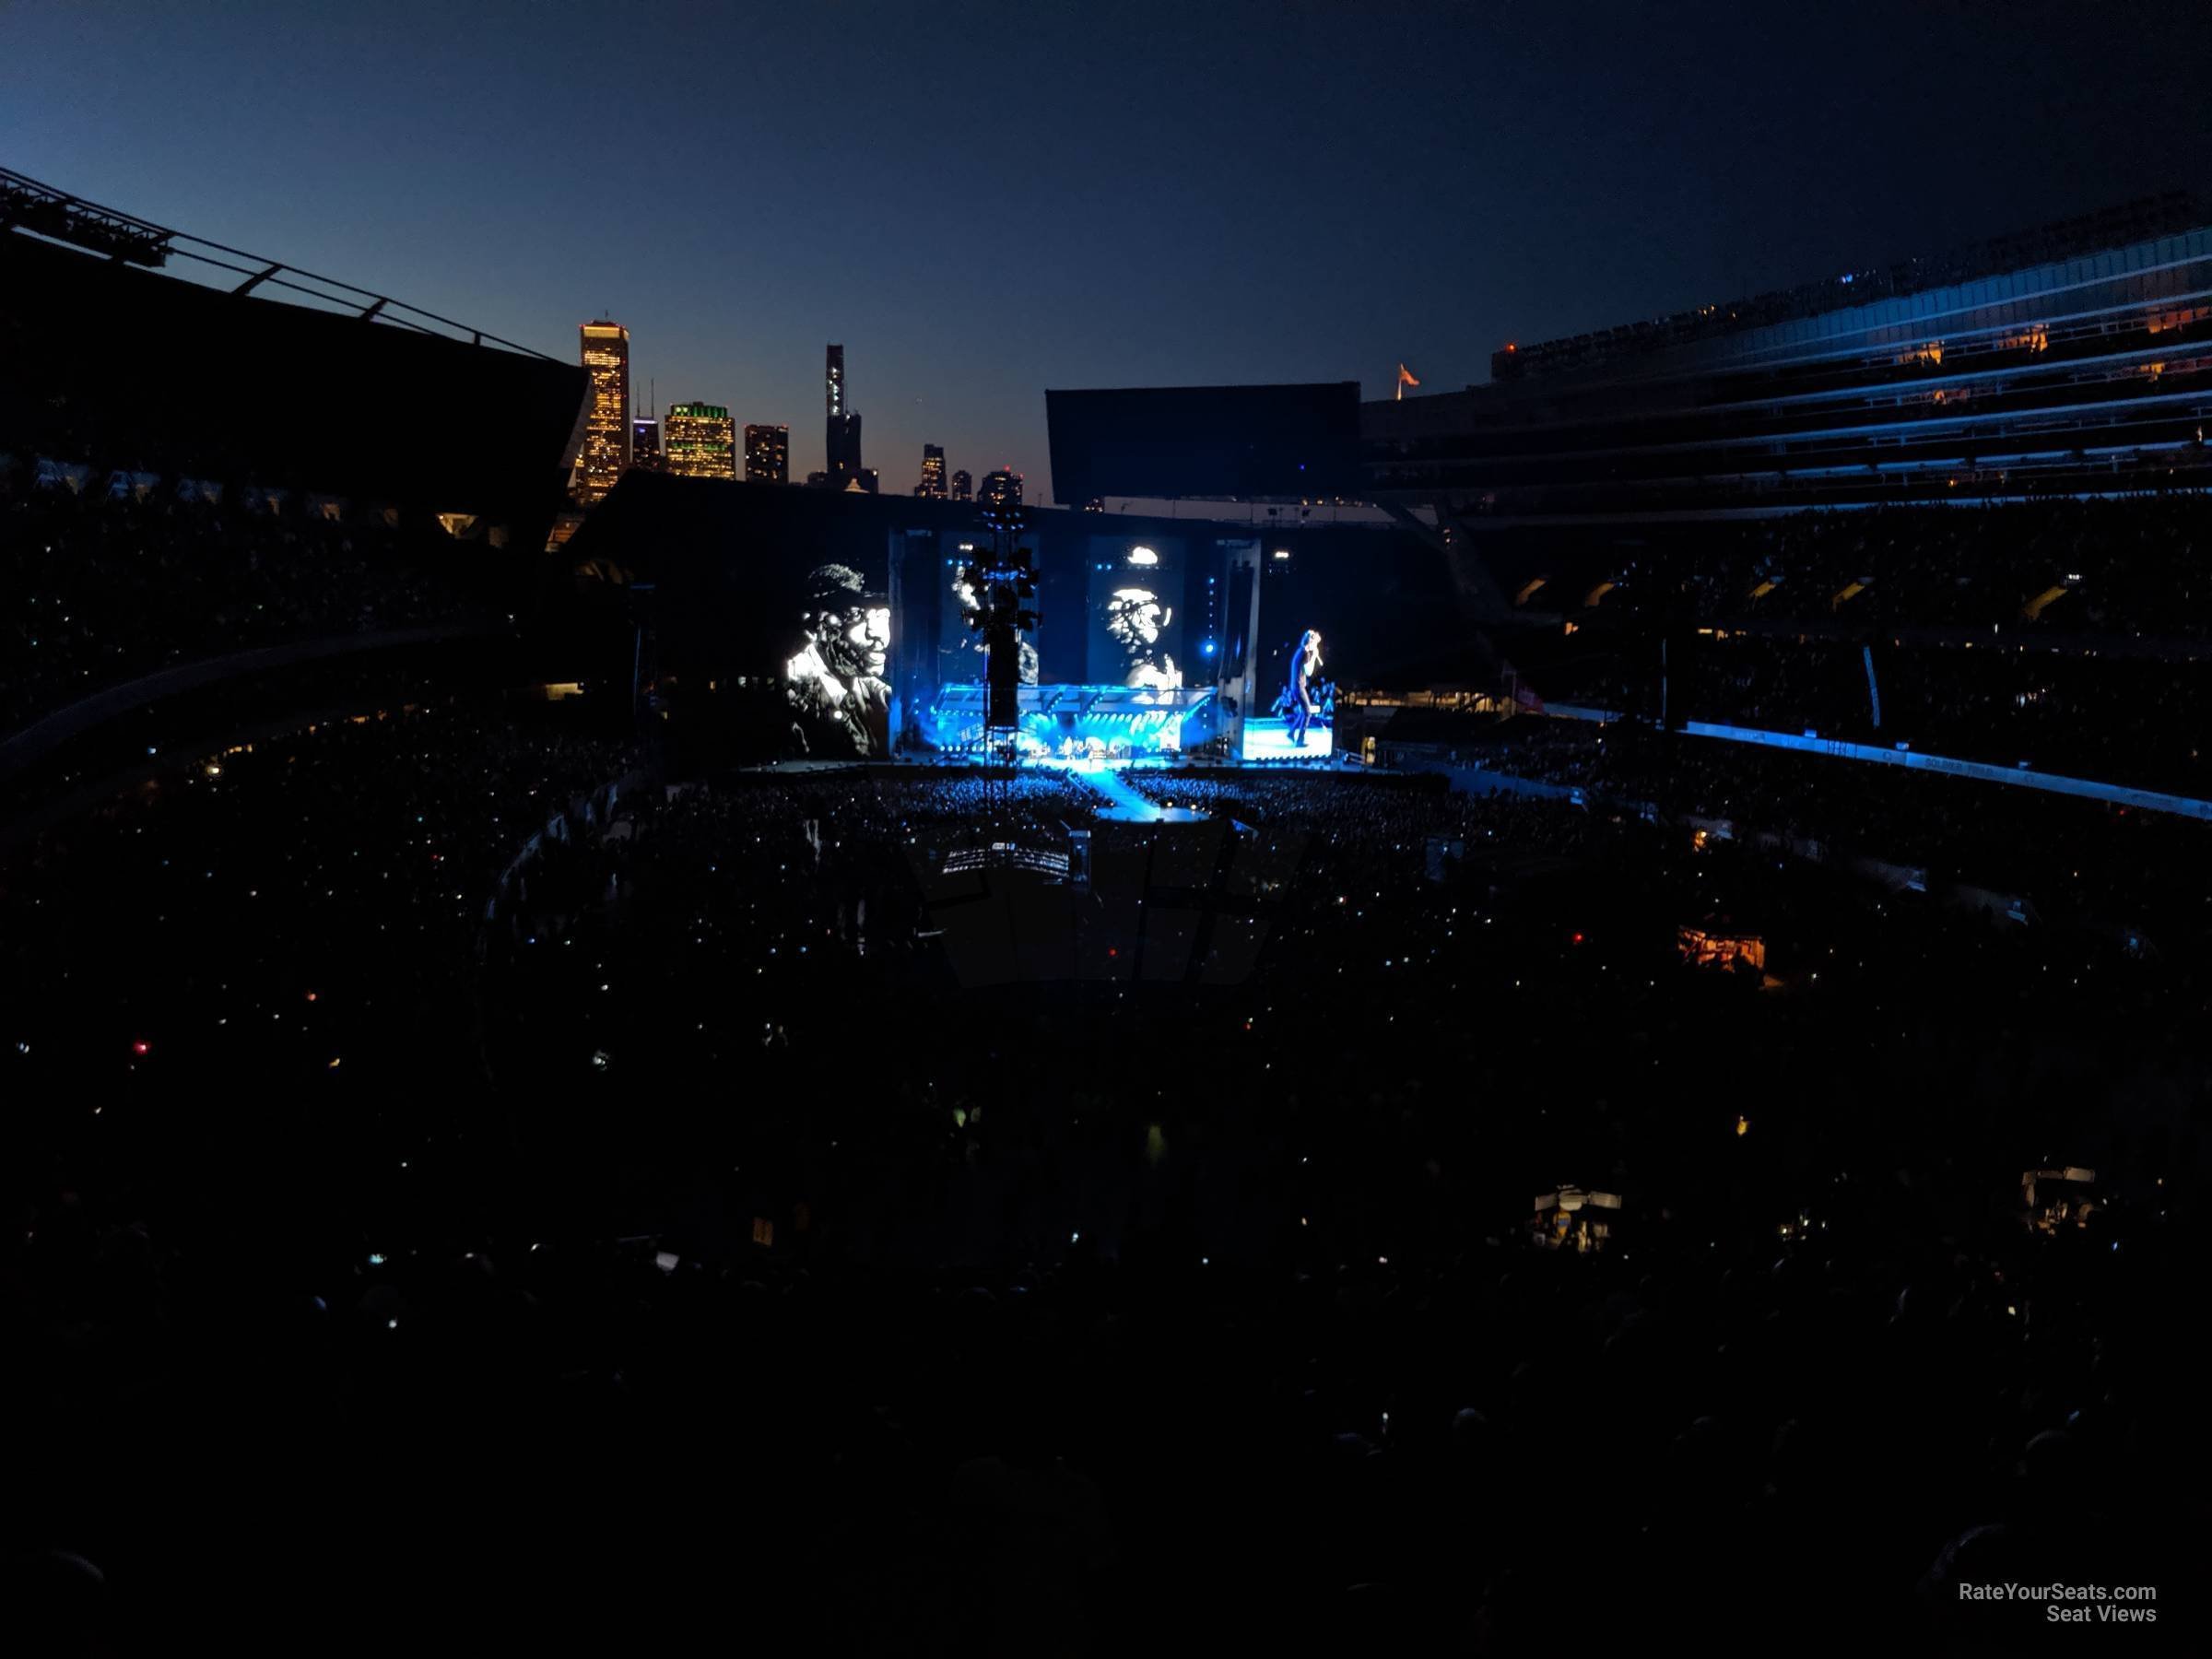 section 325, row 8 seat view  for concert - soldier field